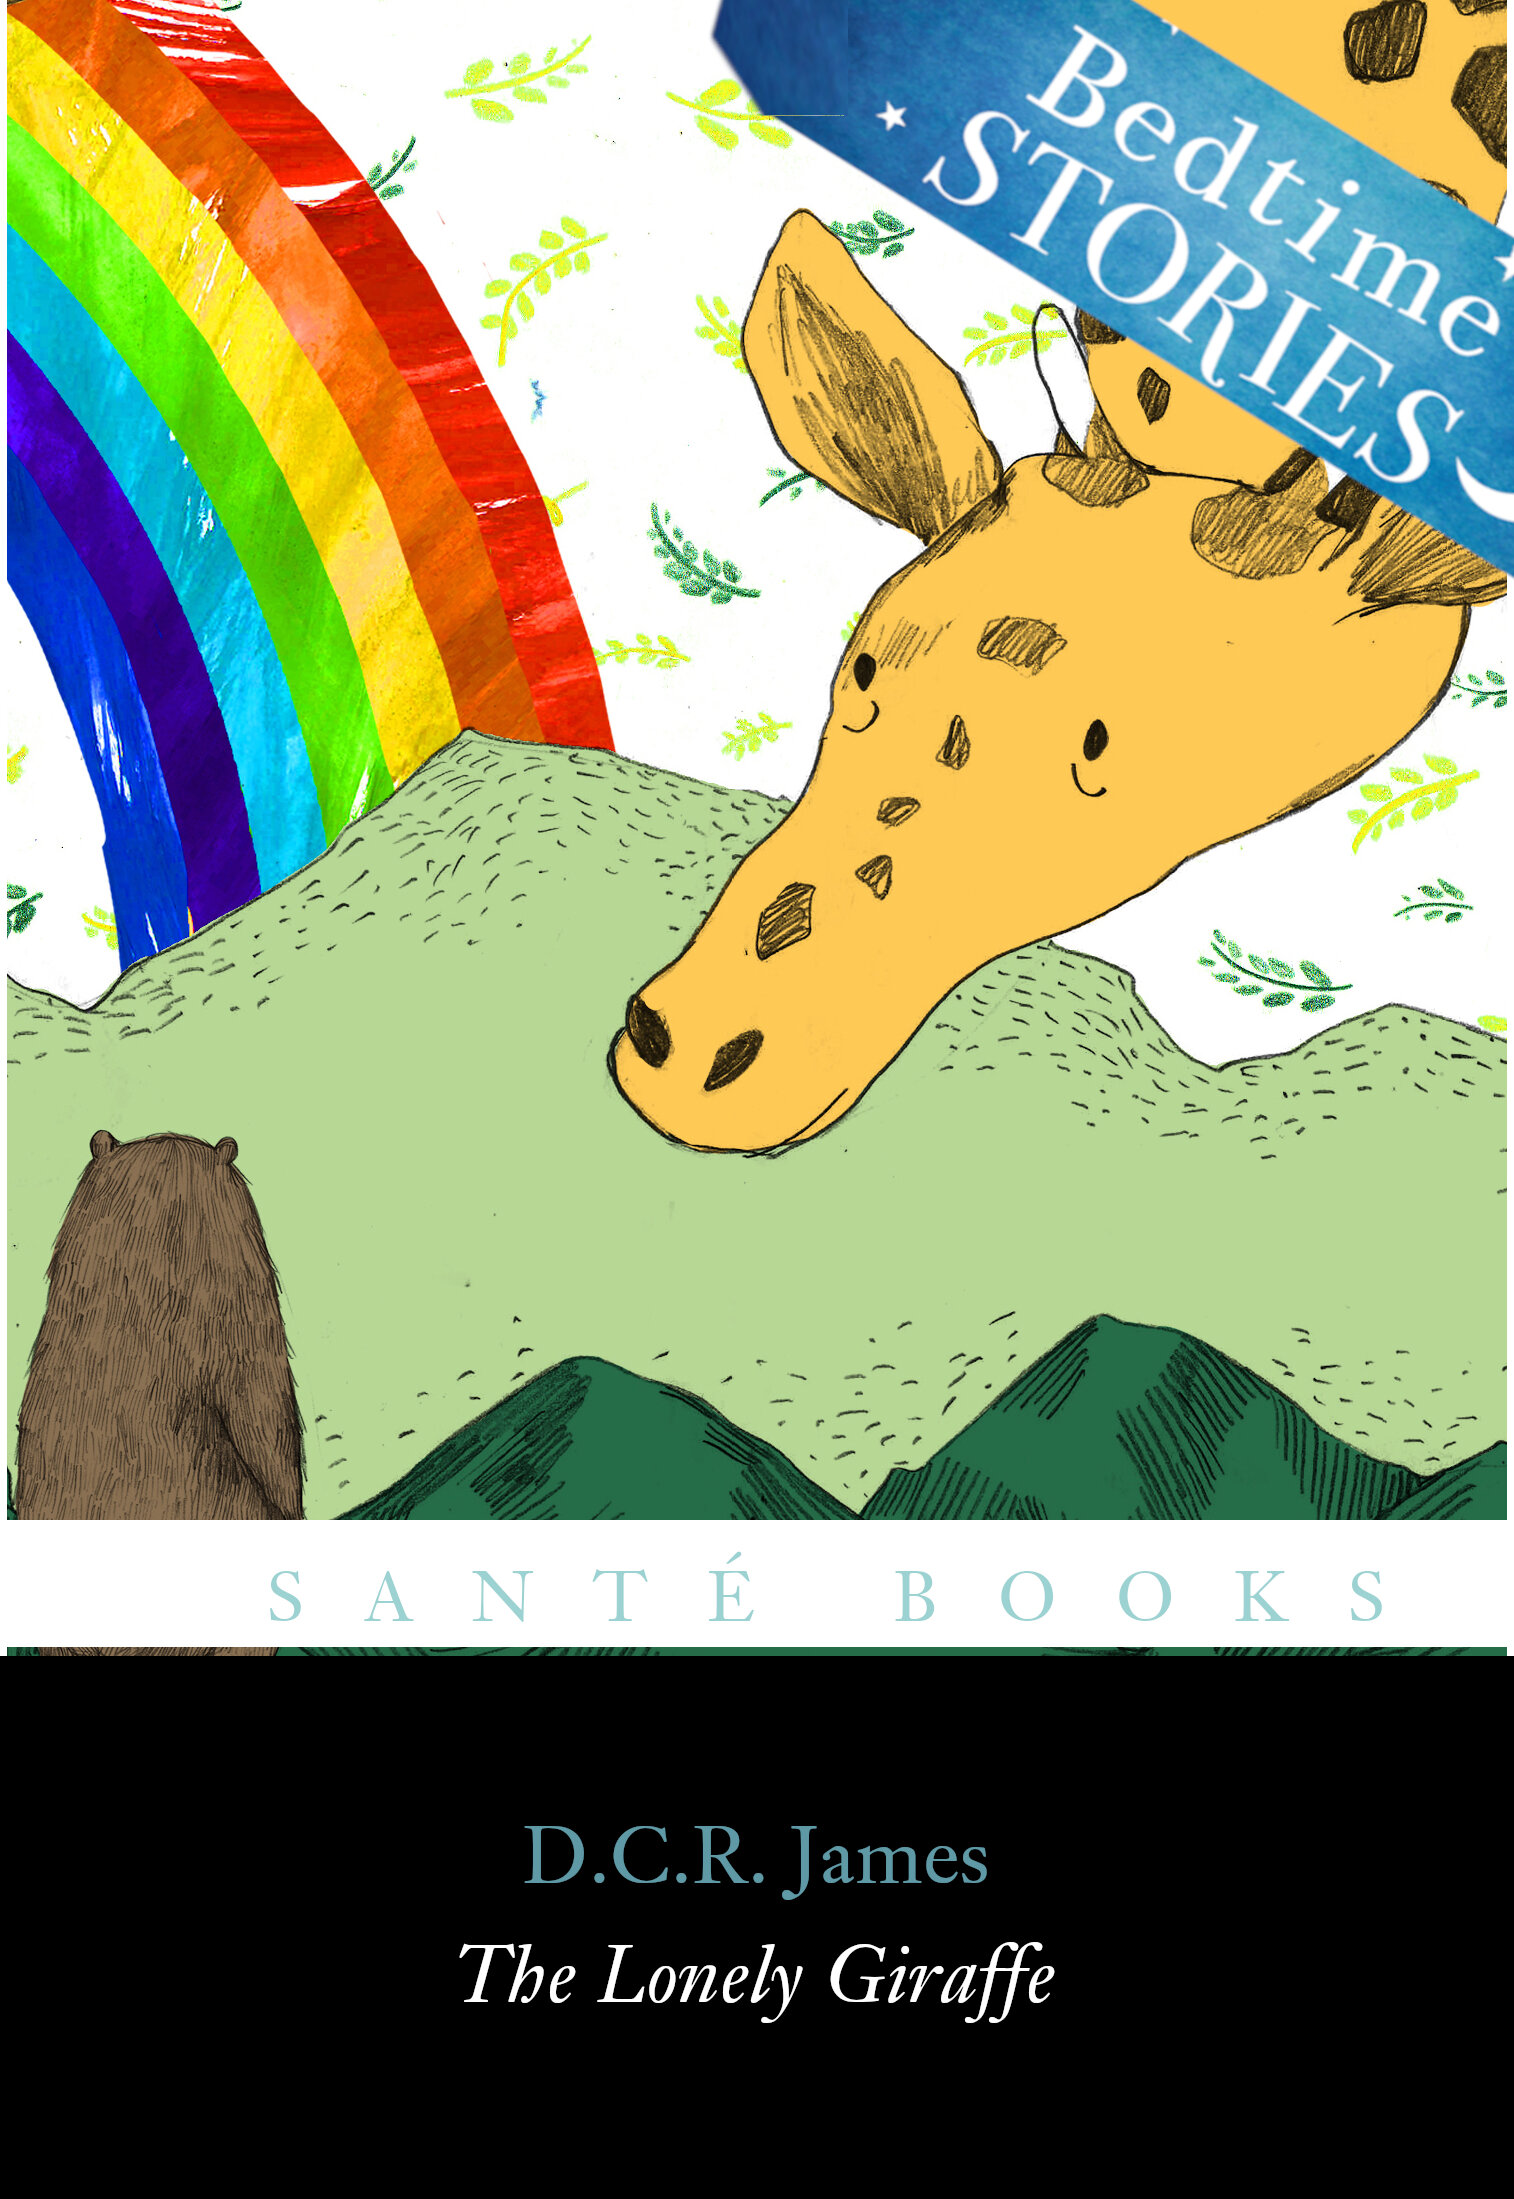 The Lonely Giraffe front cover ebook.jpg